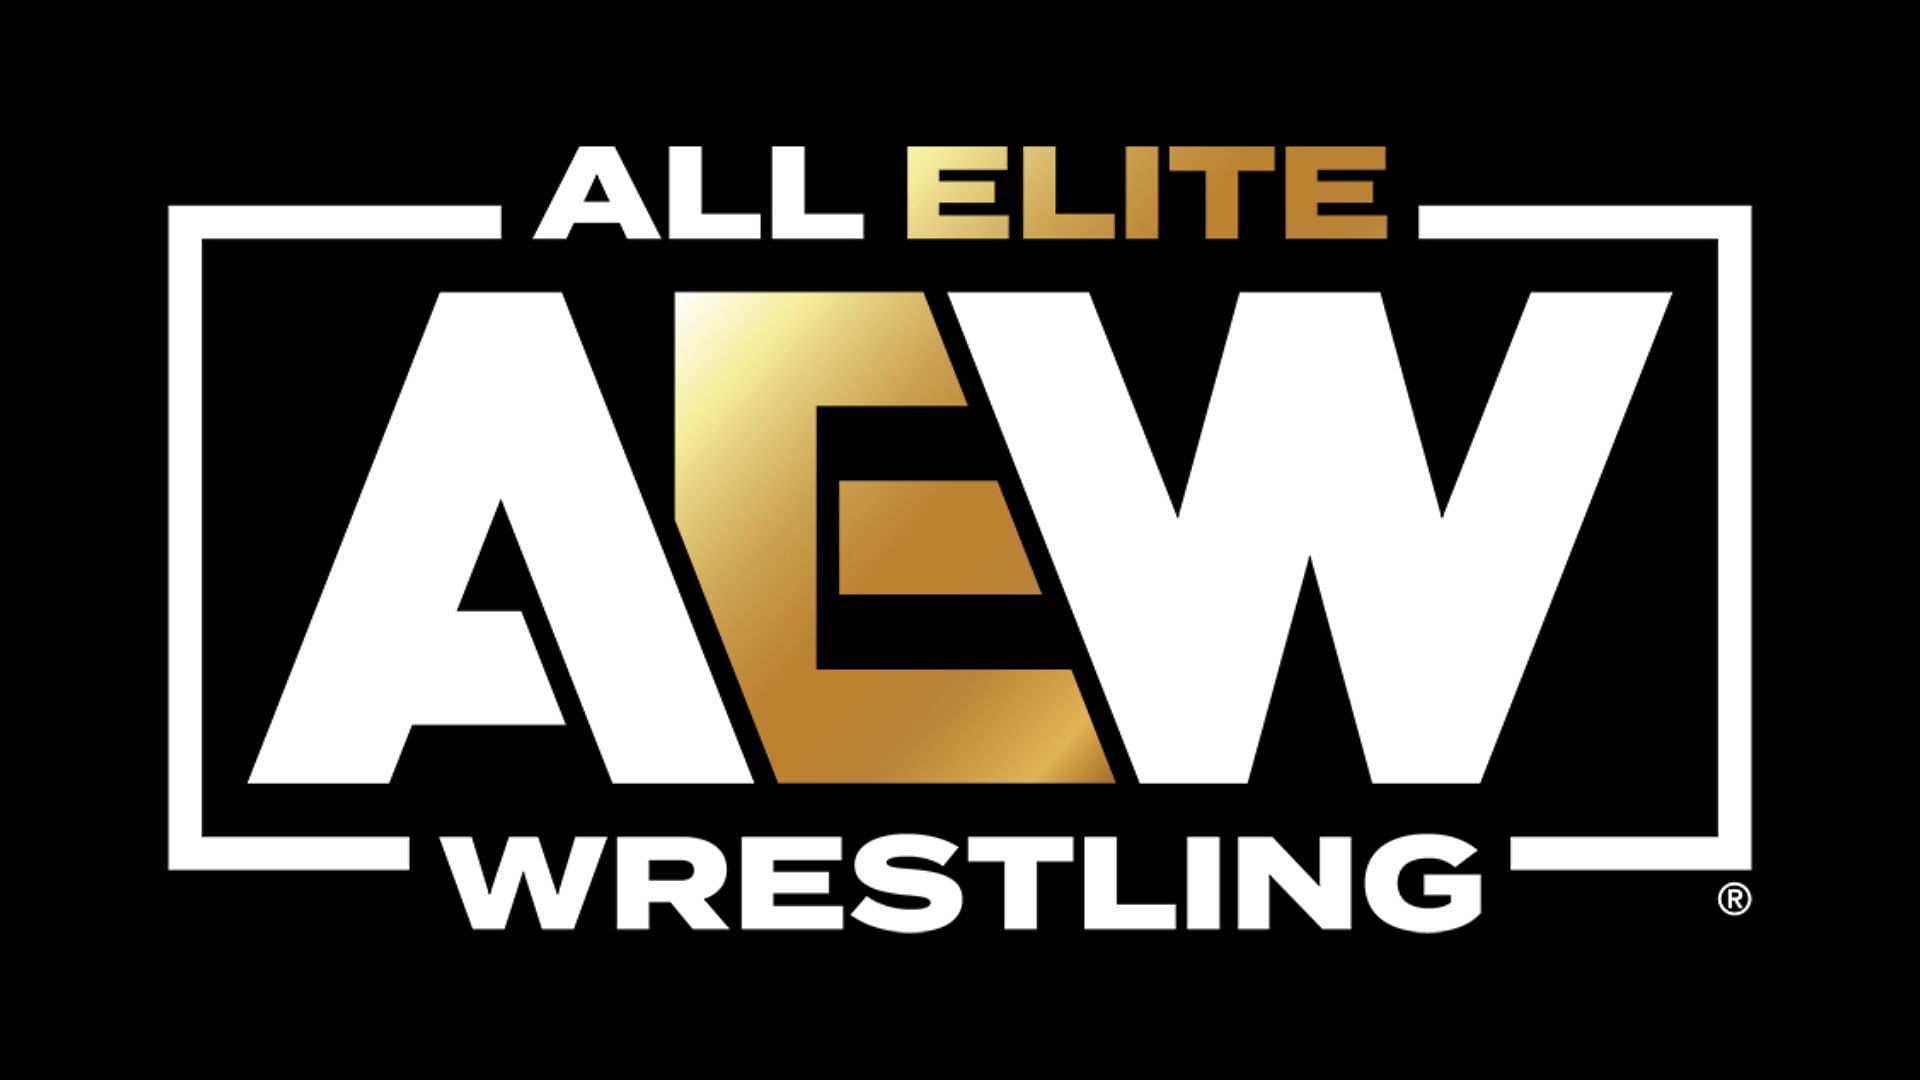 All Elite Wrestling is a Jacksonville-based promotion led by Tony Khan [photo courtesy of AEW